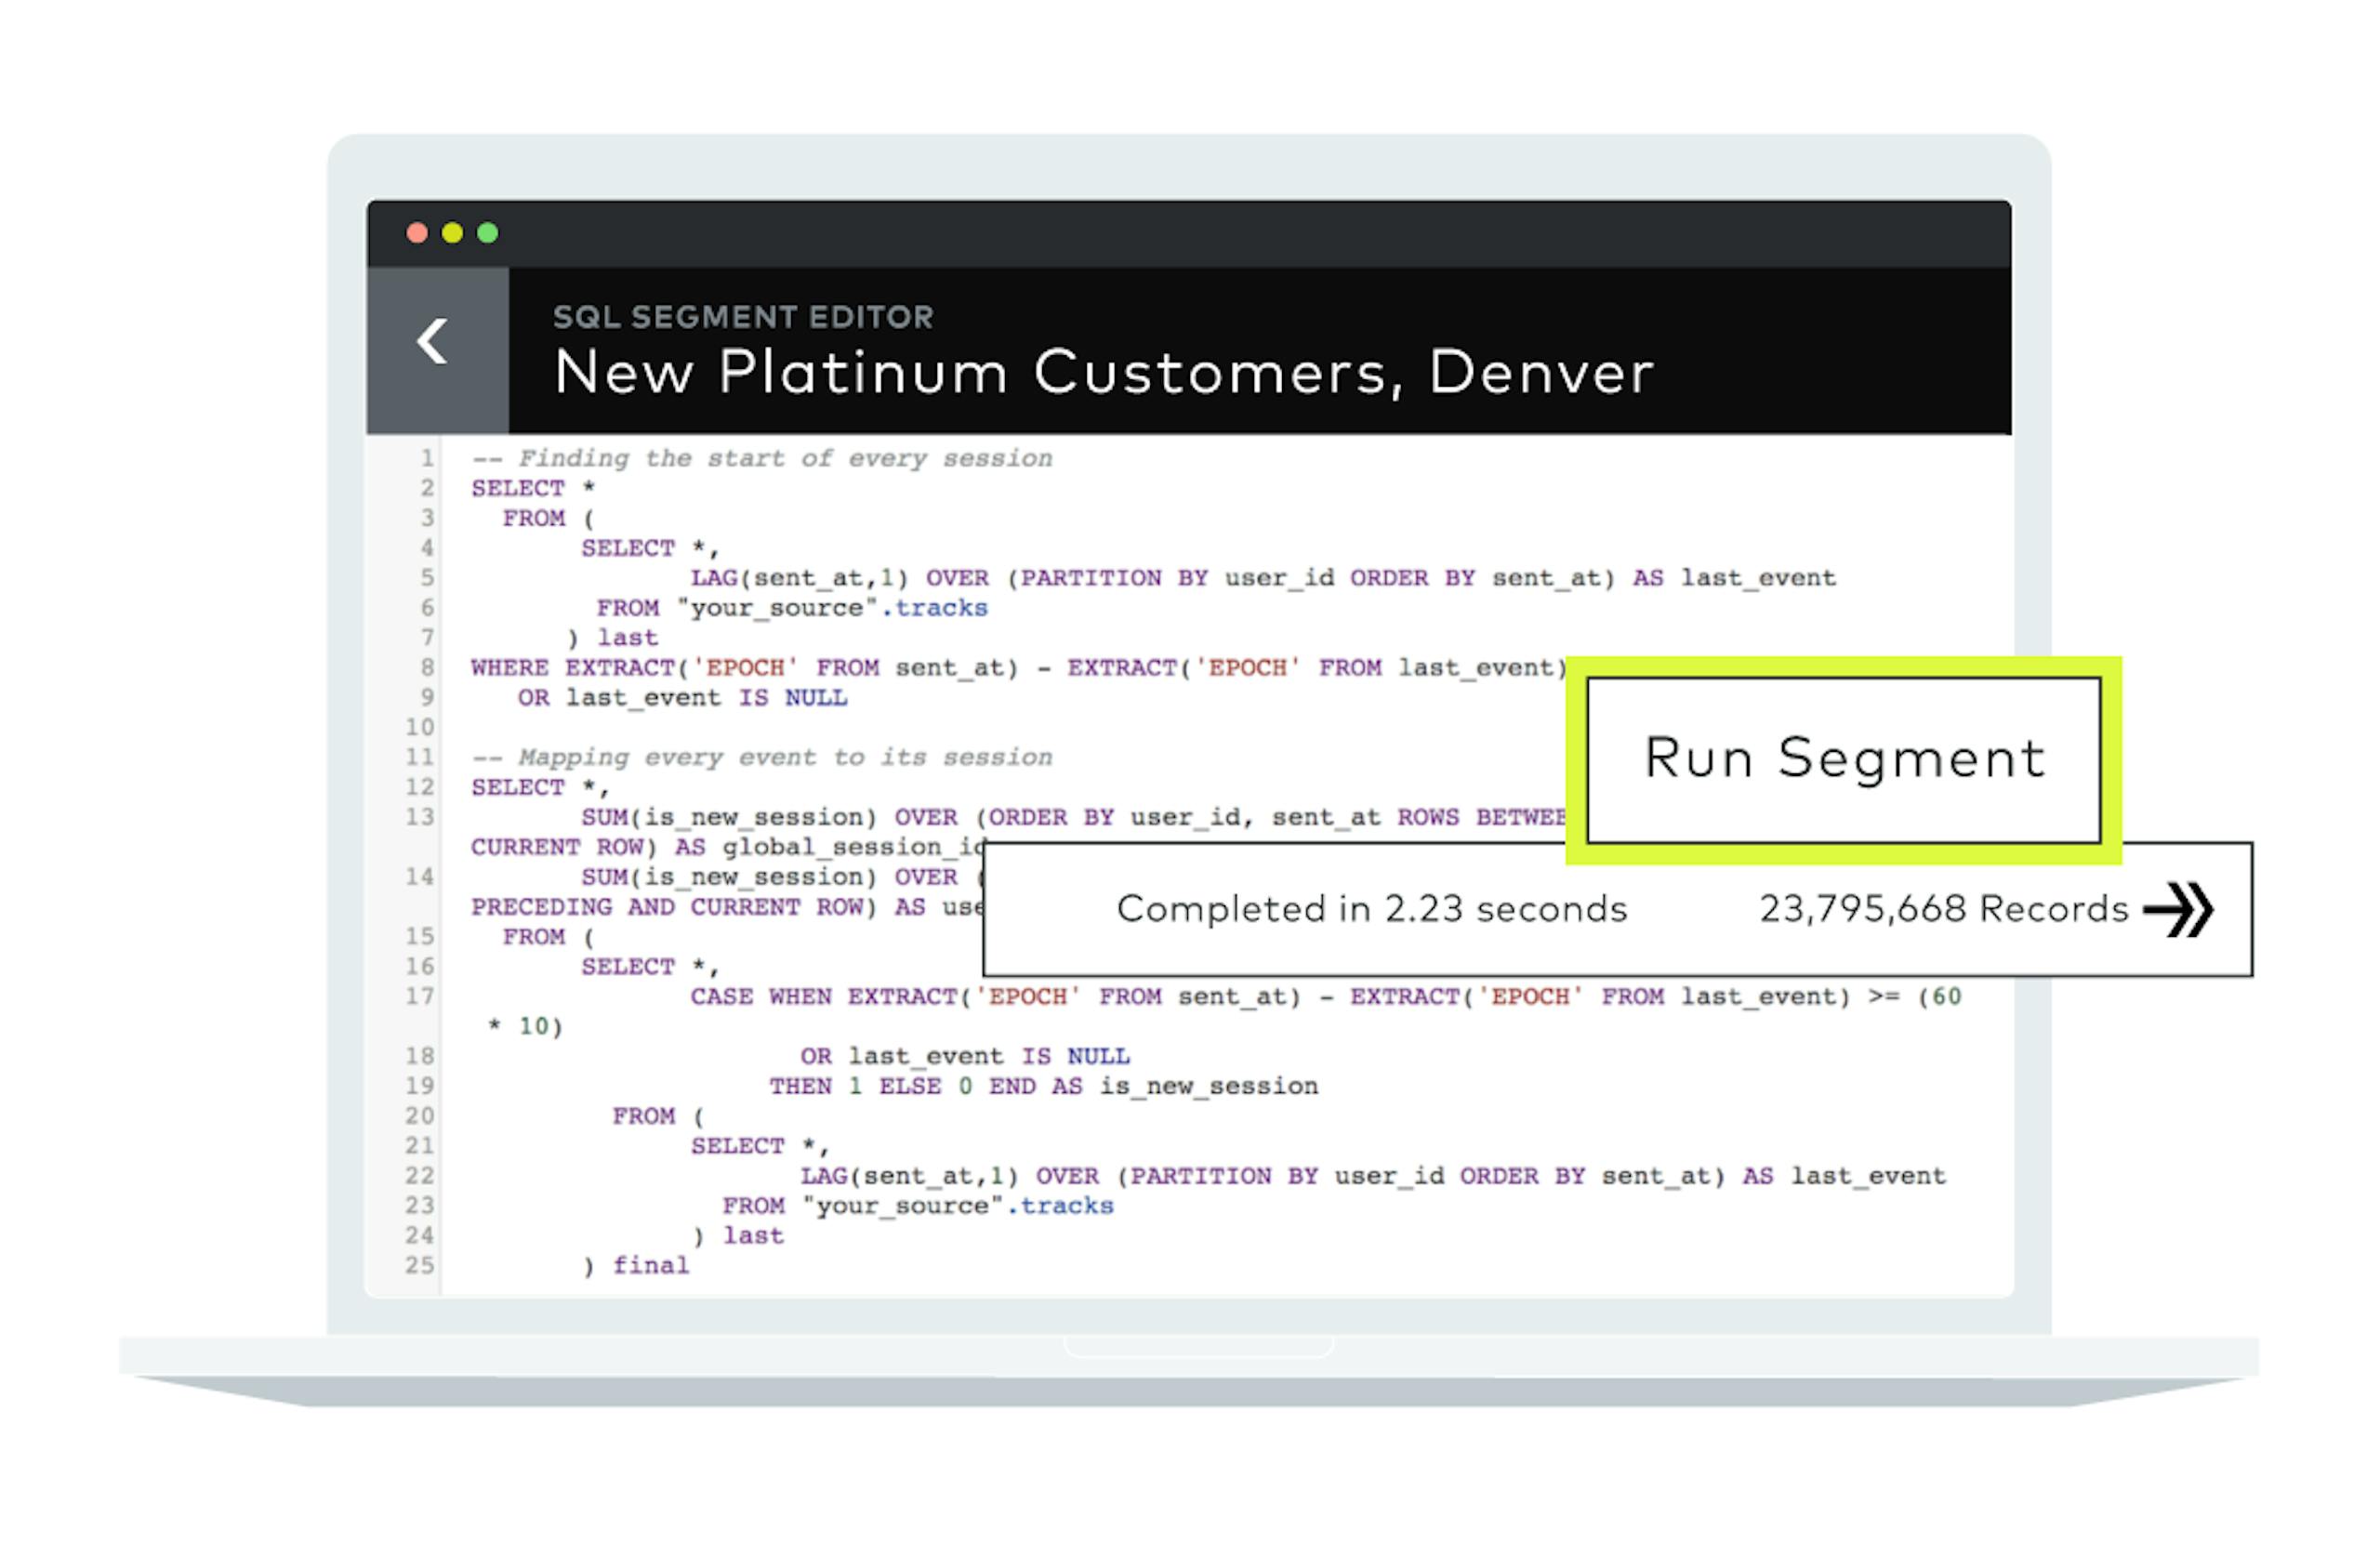 Amperity platform on a screen titled "New Platinum Customers, Denver", a SQL query, and a Run Segment button.